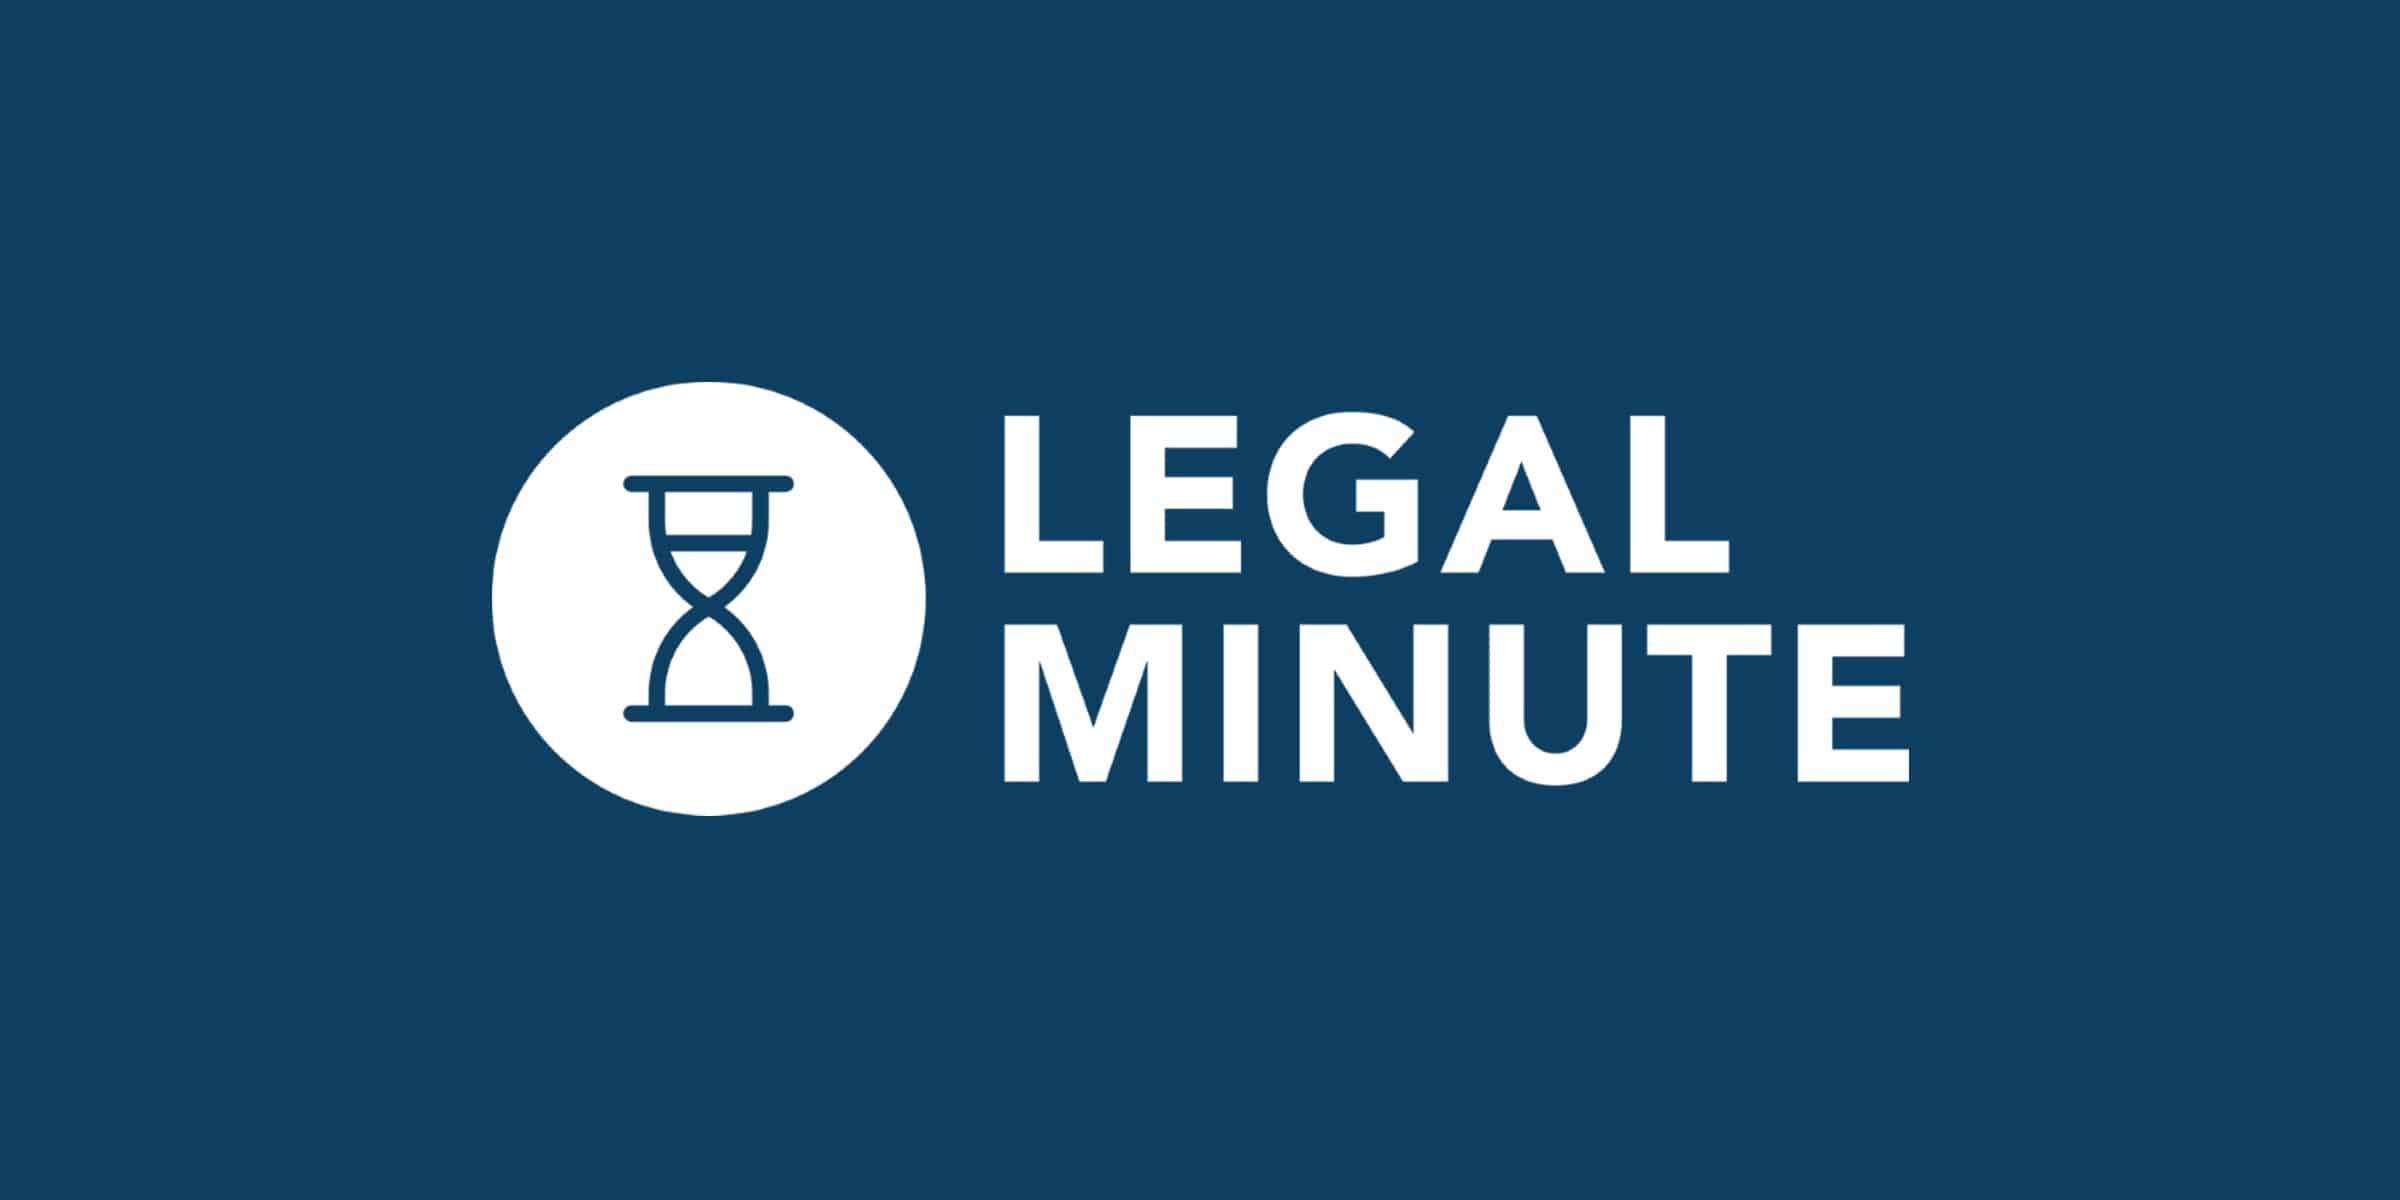 Chain | Cohn | Clark’s ‘Legal Minute’ Videos Provide Latest Tips in Personal Injury, Workers’ Compensation Law